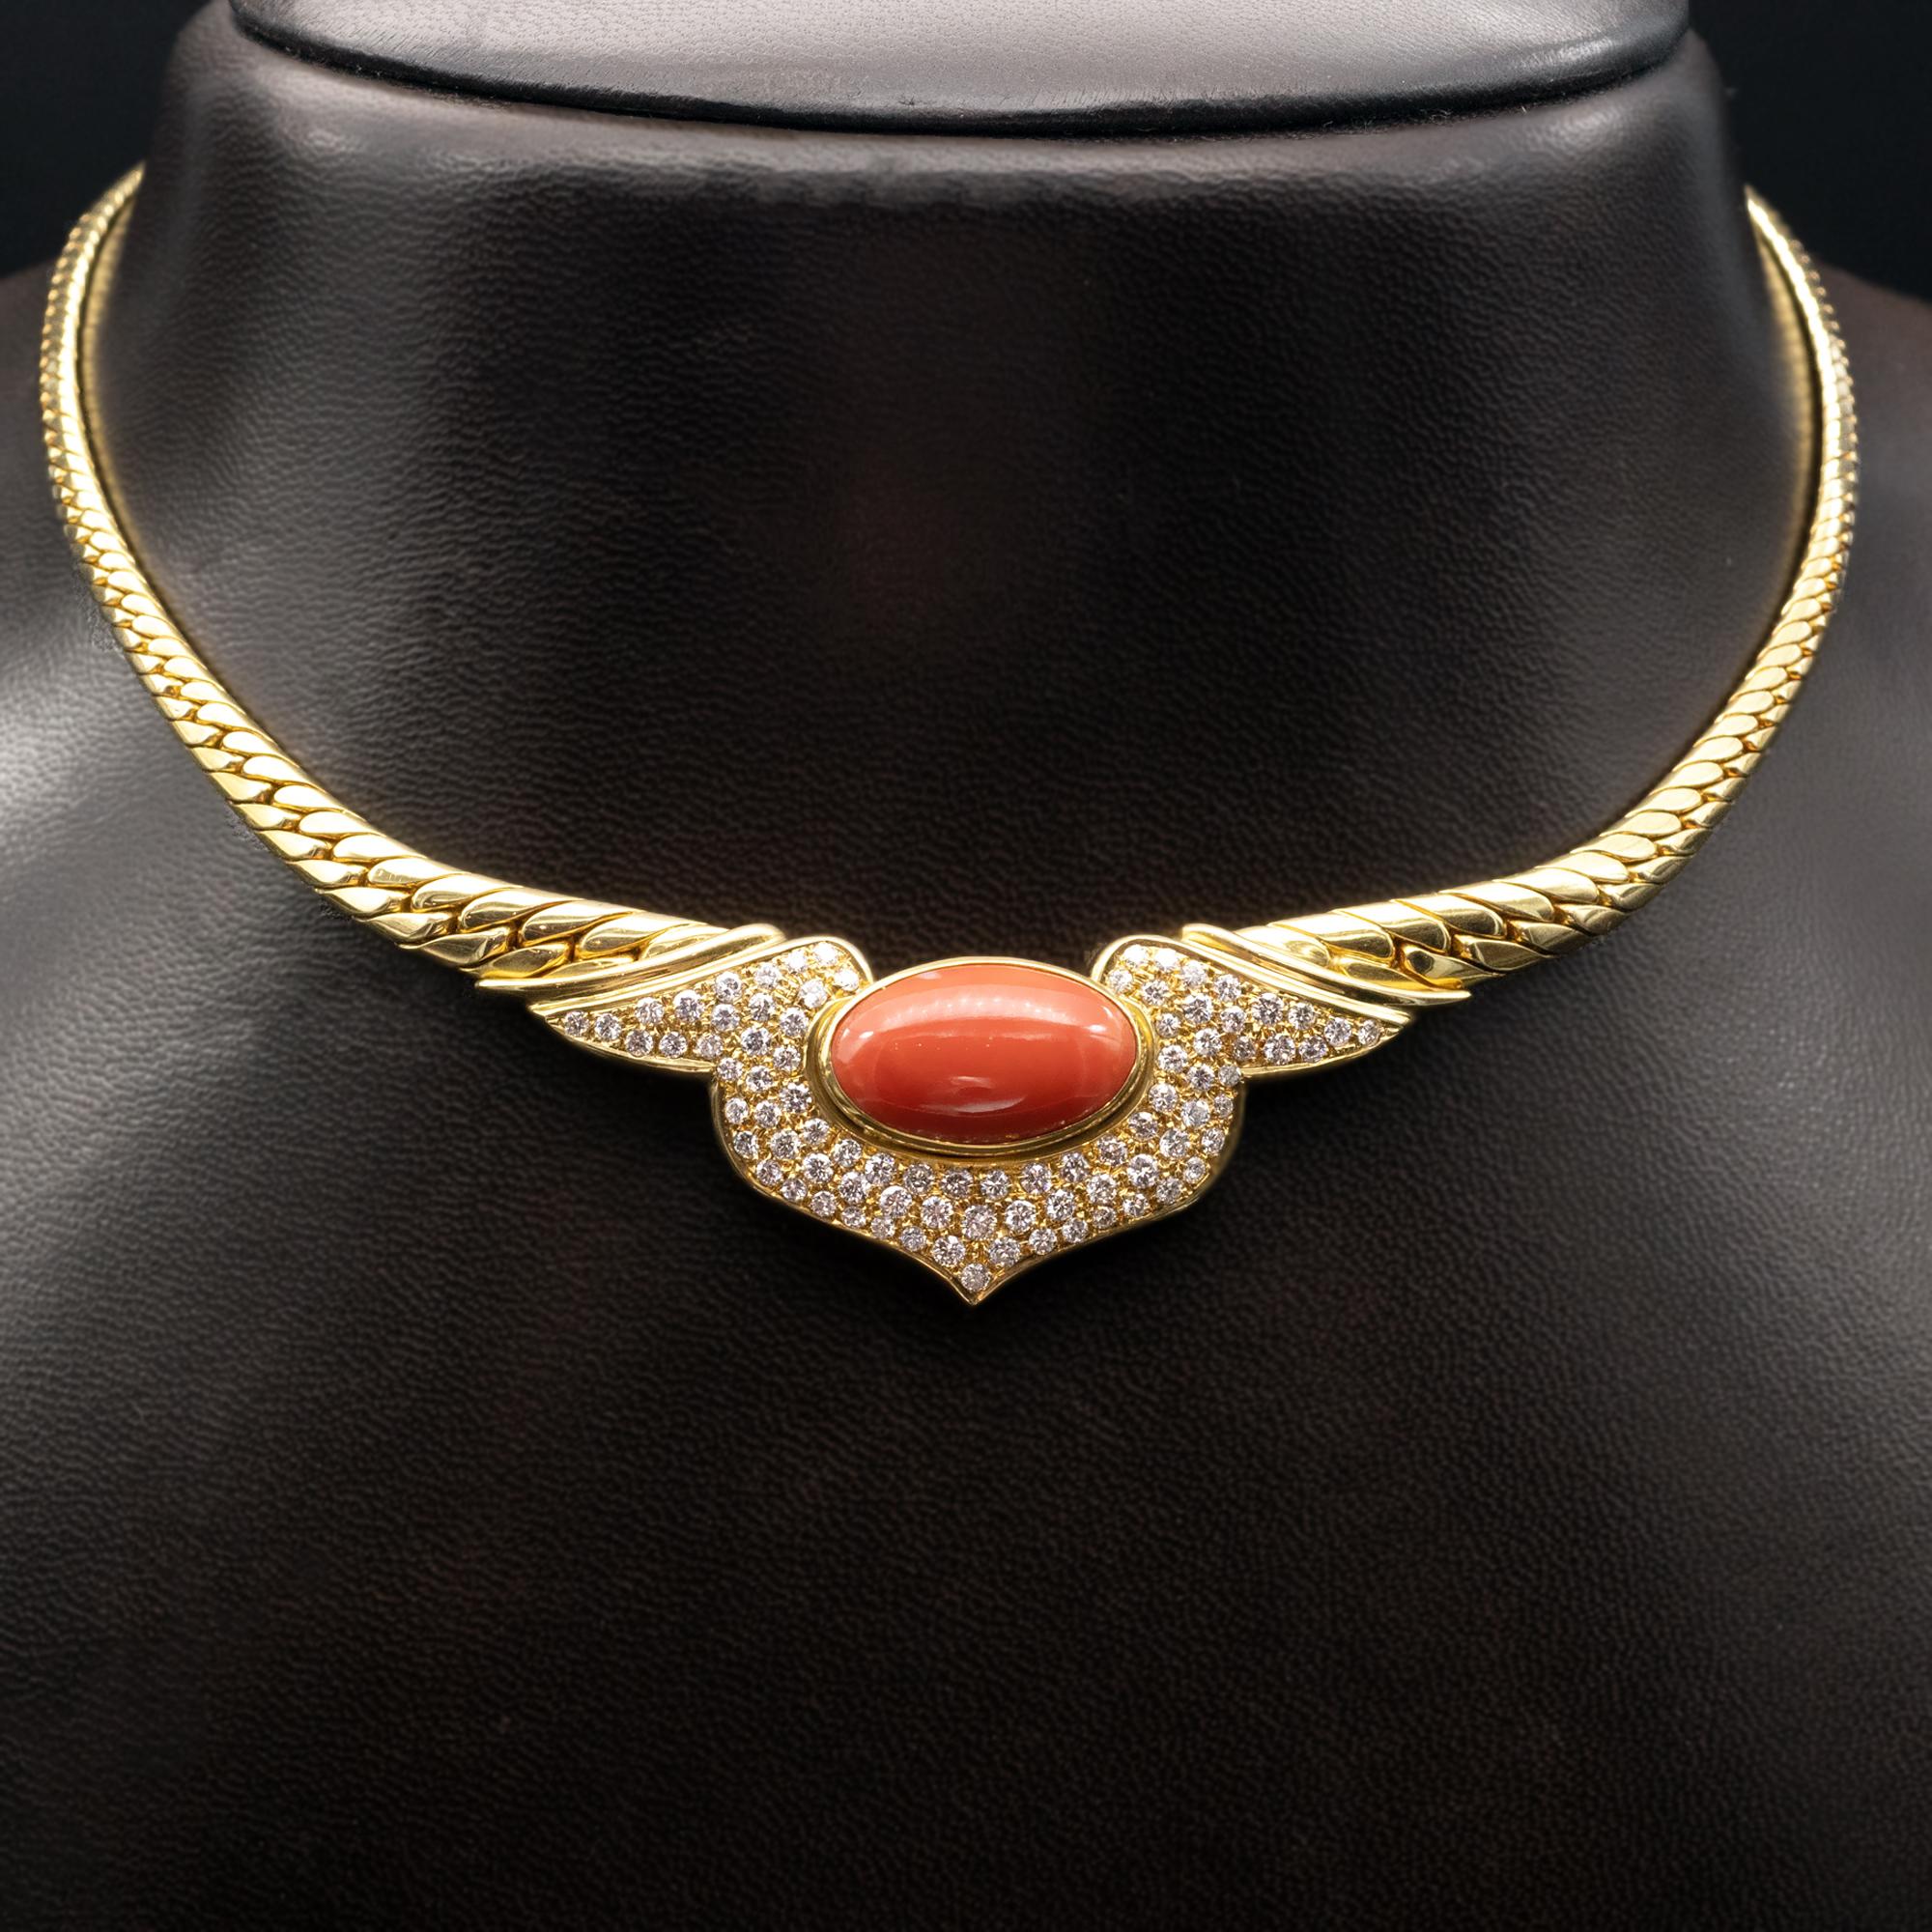 Beautiful 18 Karat Coral and diamonds choker Necklace ; An 18 mm long oval coral is nested in motive pavé set with  round brilliant cut diamonds . Very nice make , jou can see the beehive openings behind the diamonds
Diamonds: Approx. 2 carat  FG